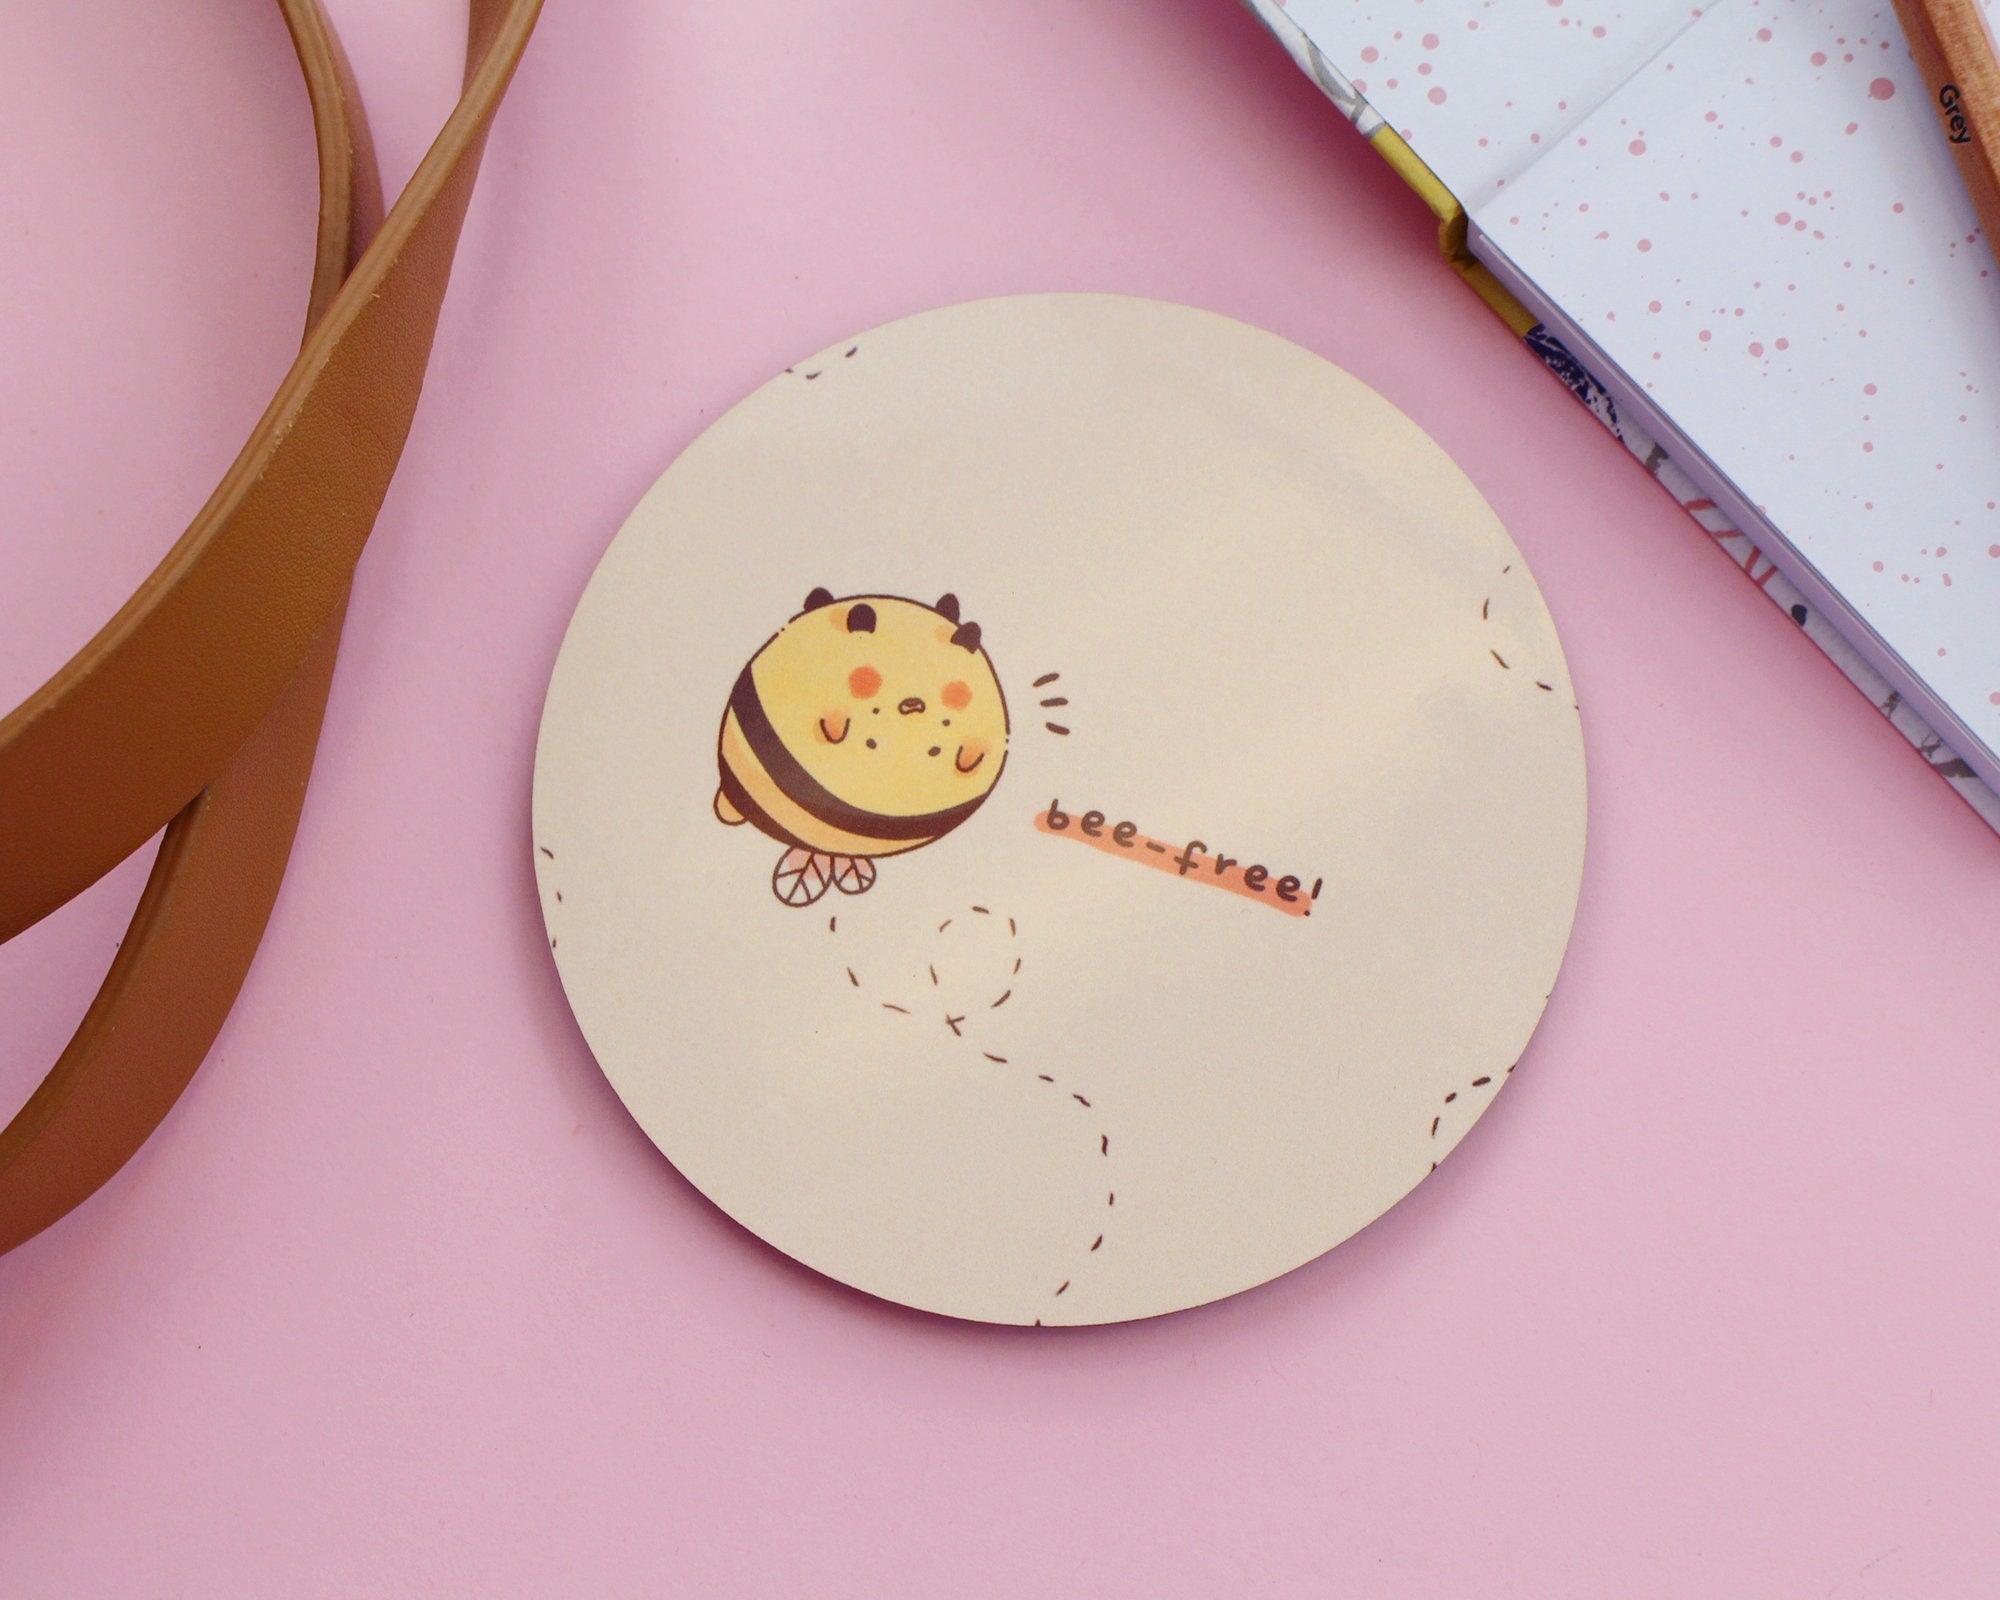 Adorable handprinted MDF coasters featuring original bumblebee illustrations, perfect for adding kawaii buzz to your space.